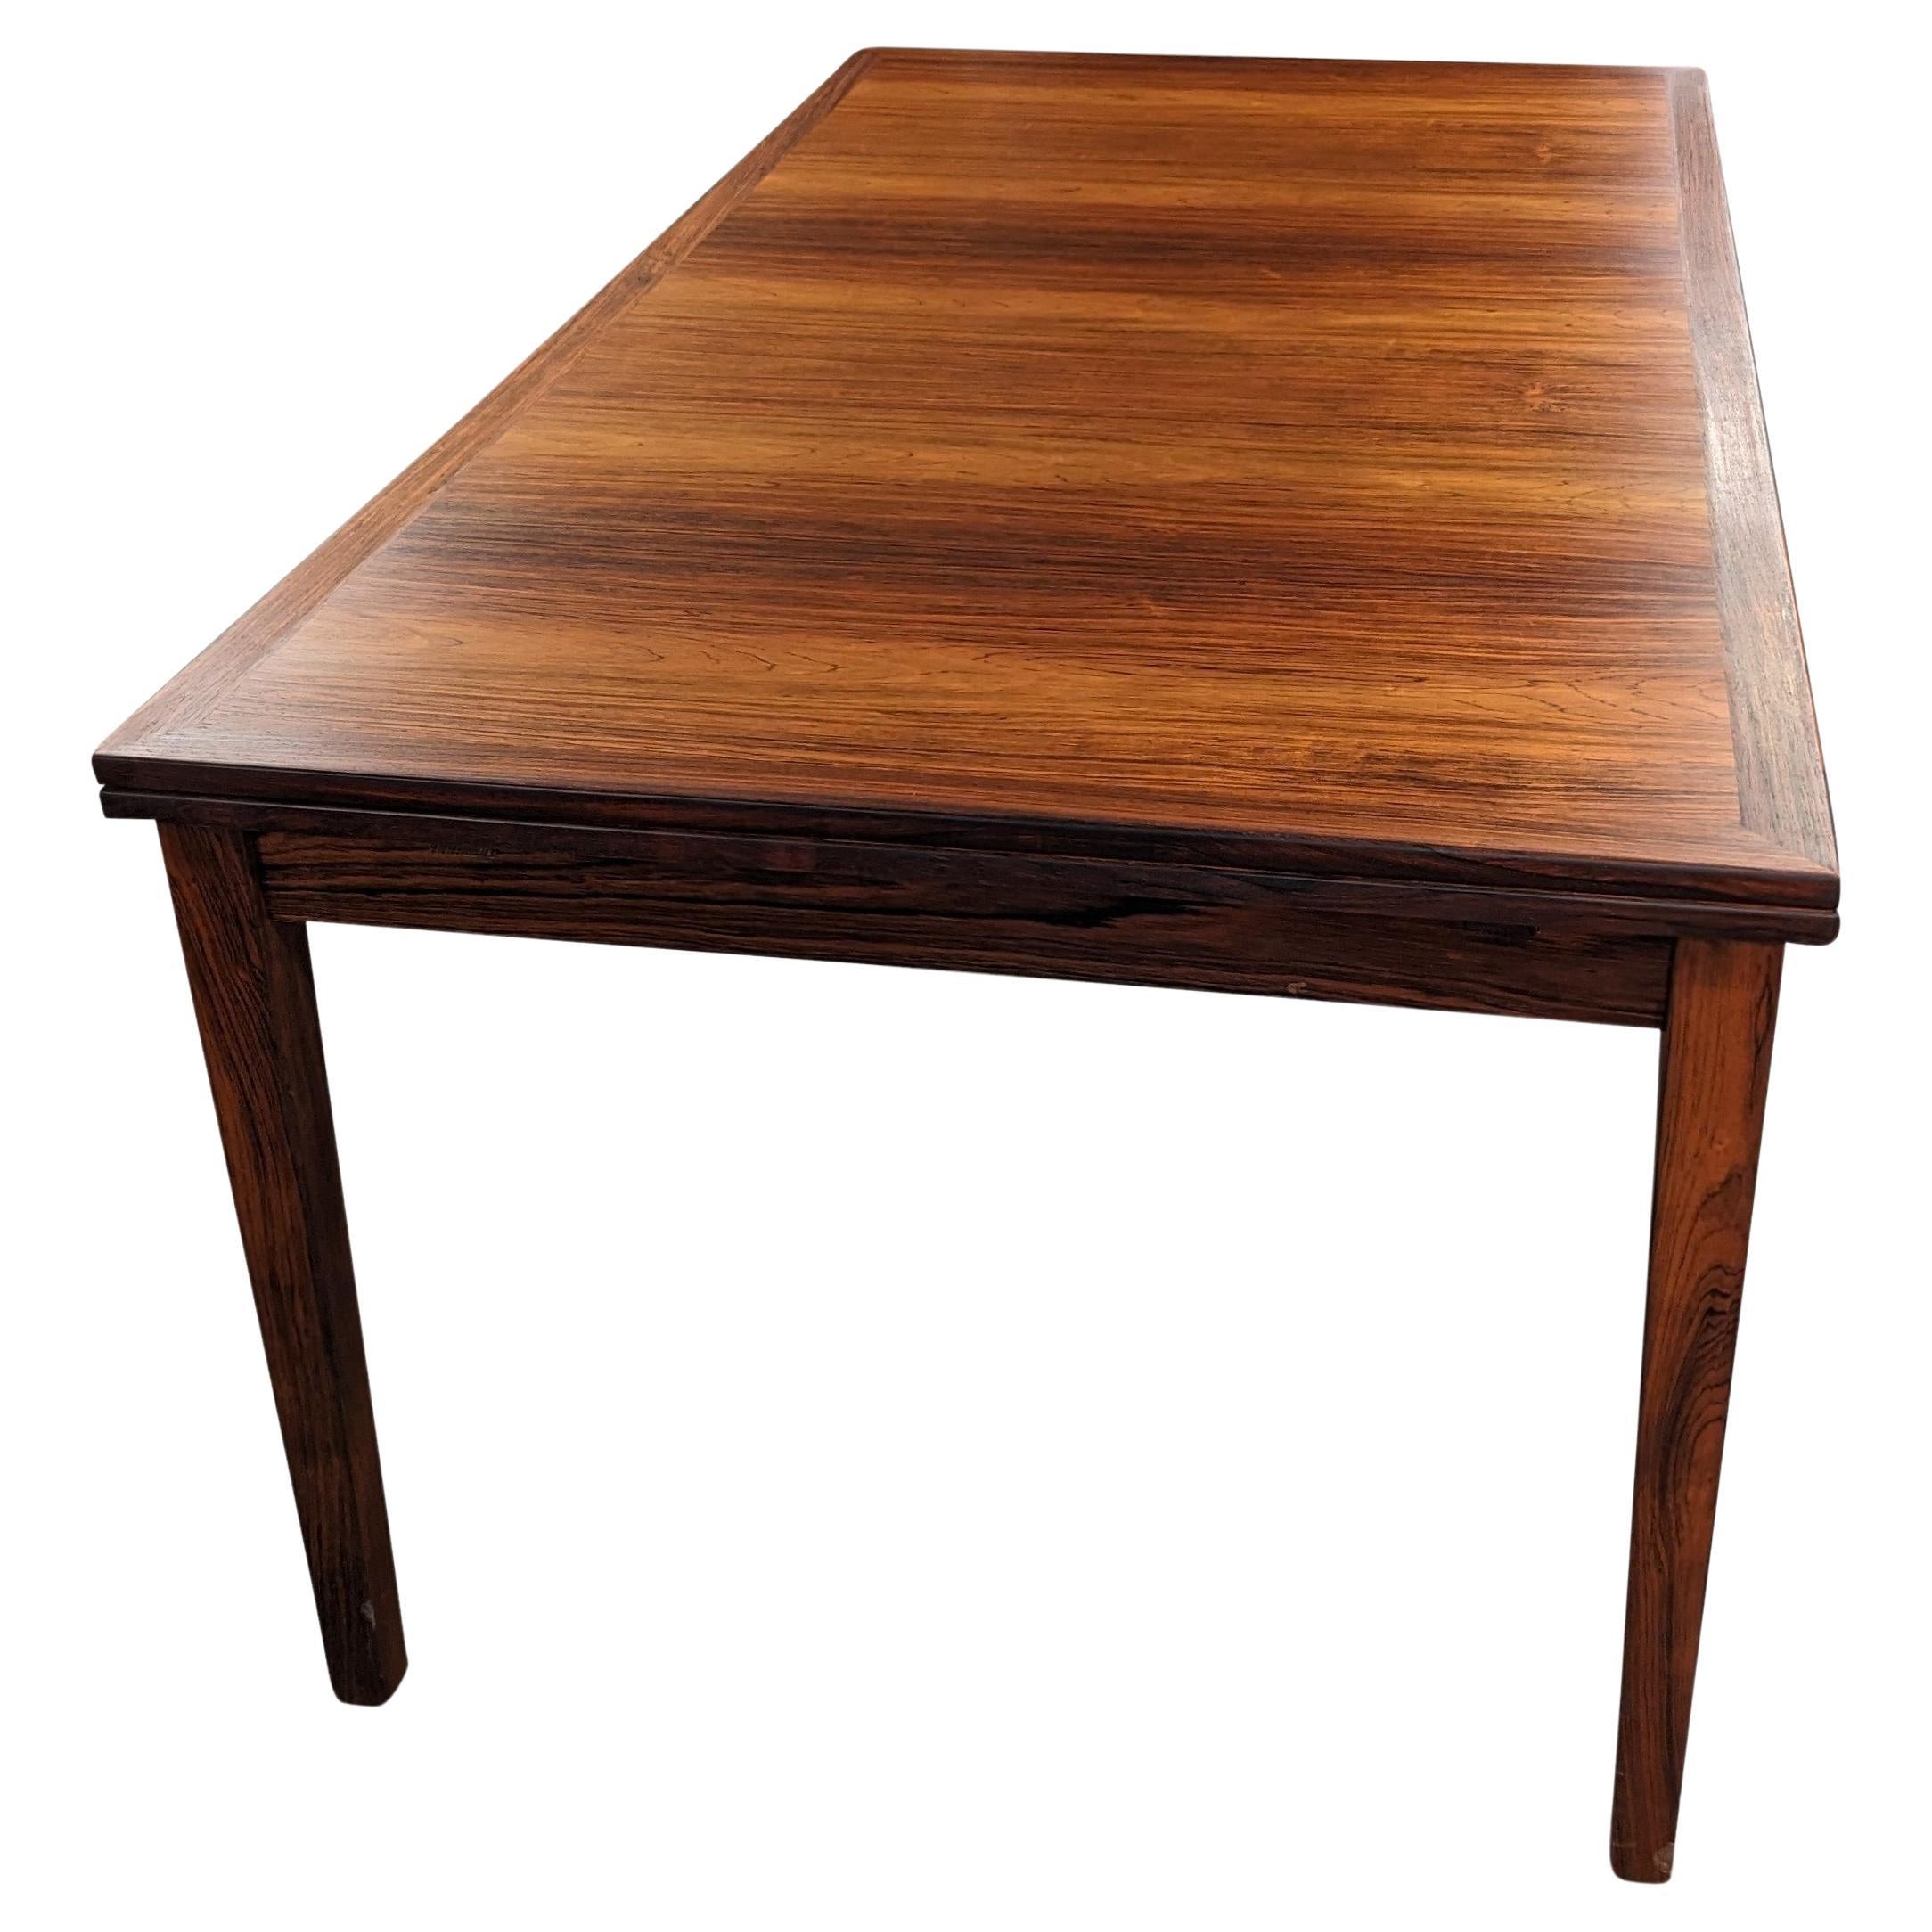 Kai Winding Rosewood Dining Table w Two Hidden Leaves, Vintage Danish 122299